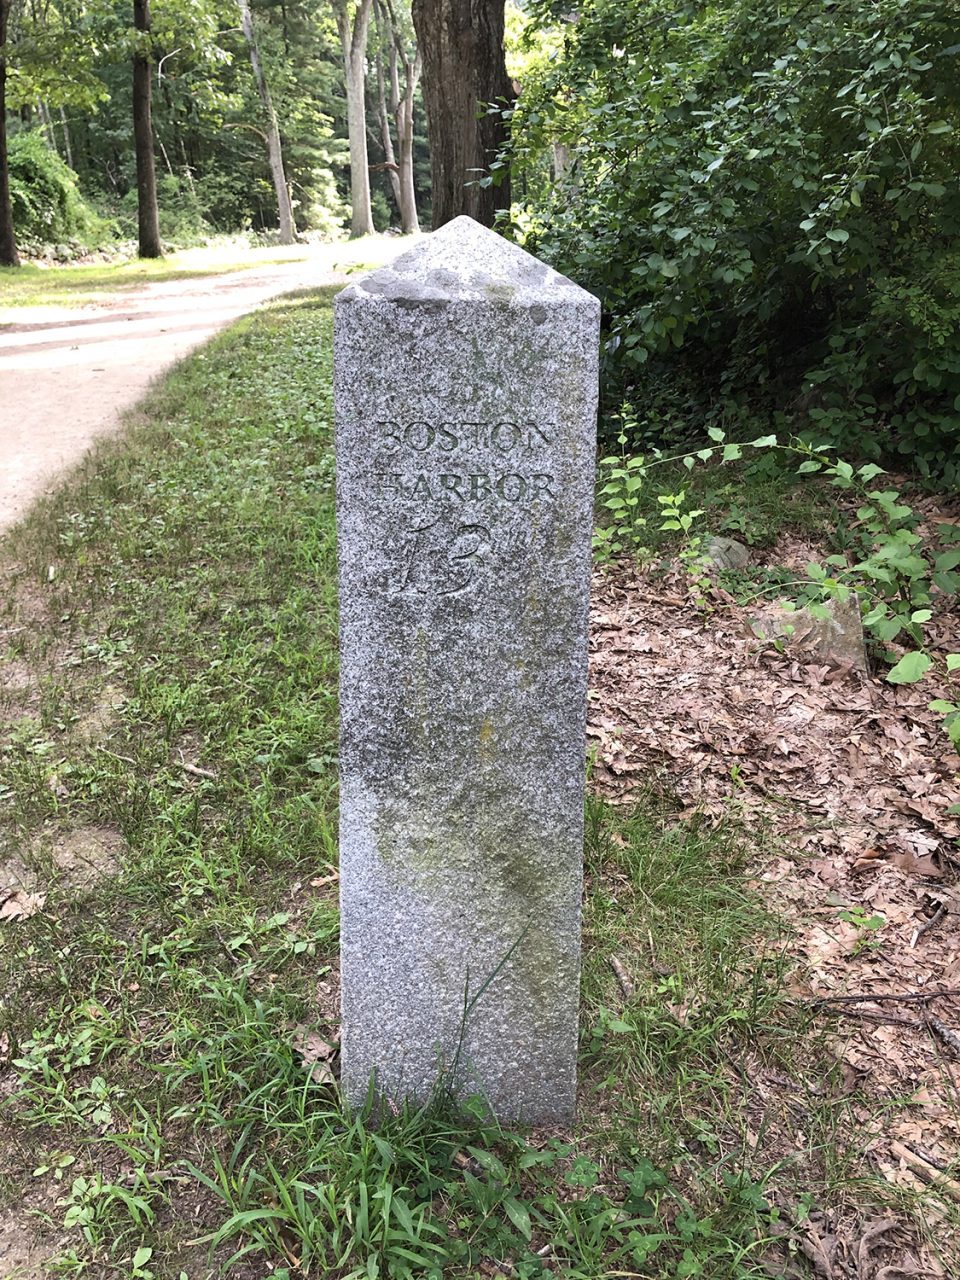 A granite milestone marker along the old Bay Road, now called the battle road, marks the distance to Boston Harbor (13 miles)